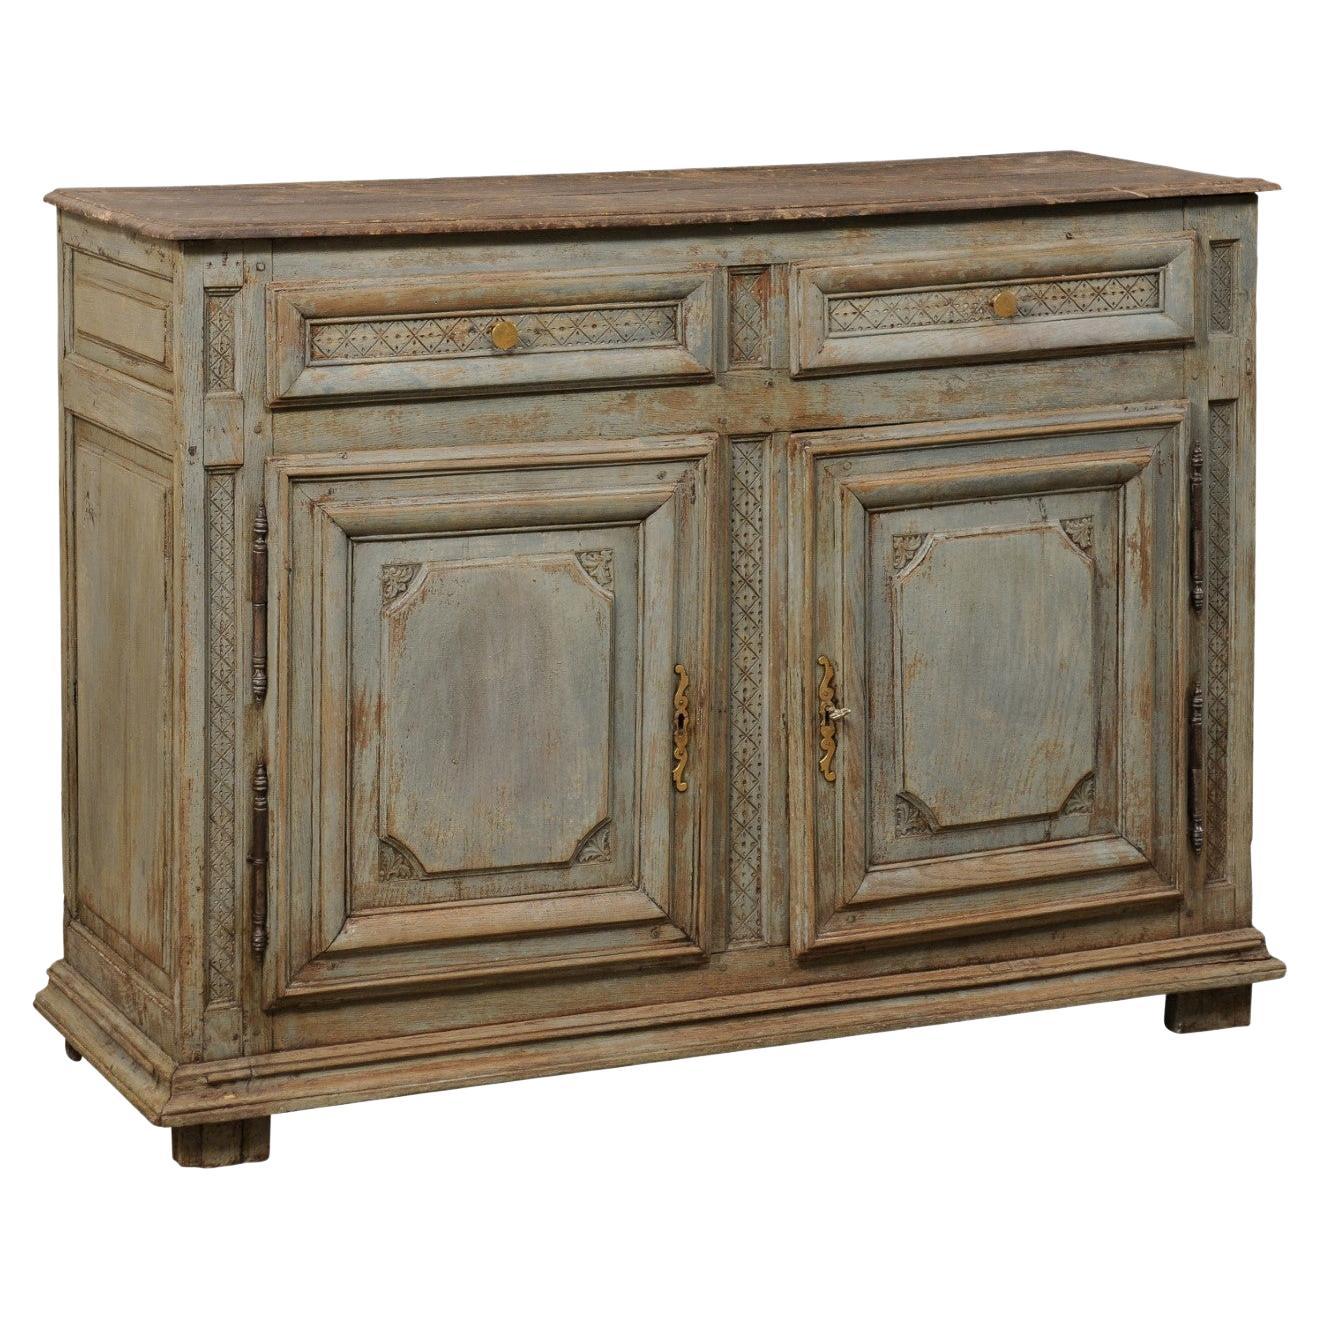 Early 19th C. French Wood Cabinet w/Nice Accents & Faux-Marble Painted Top 